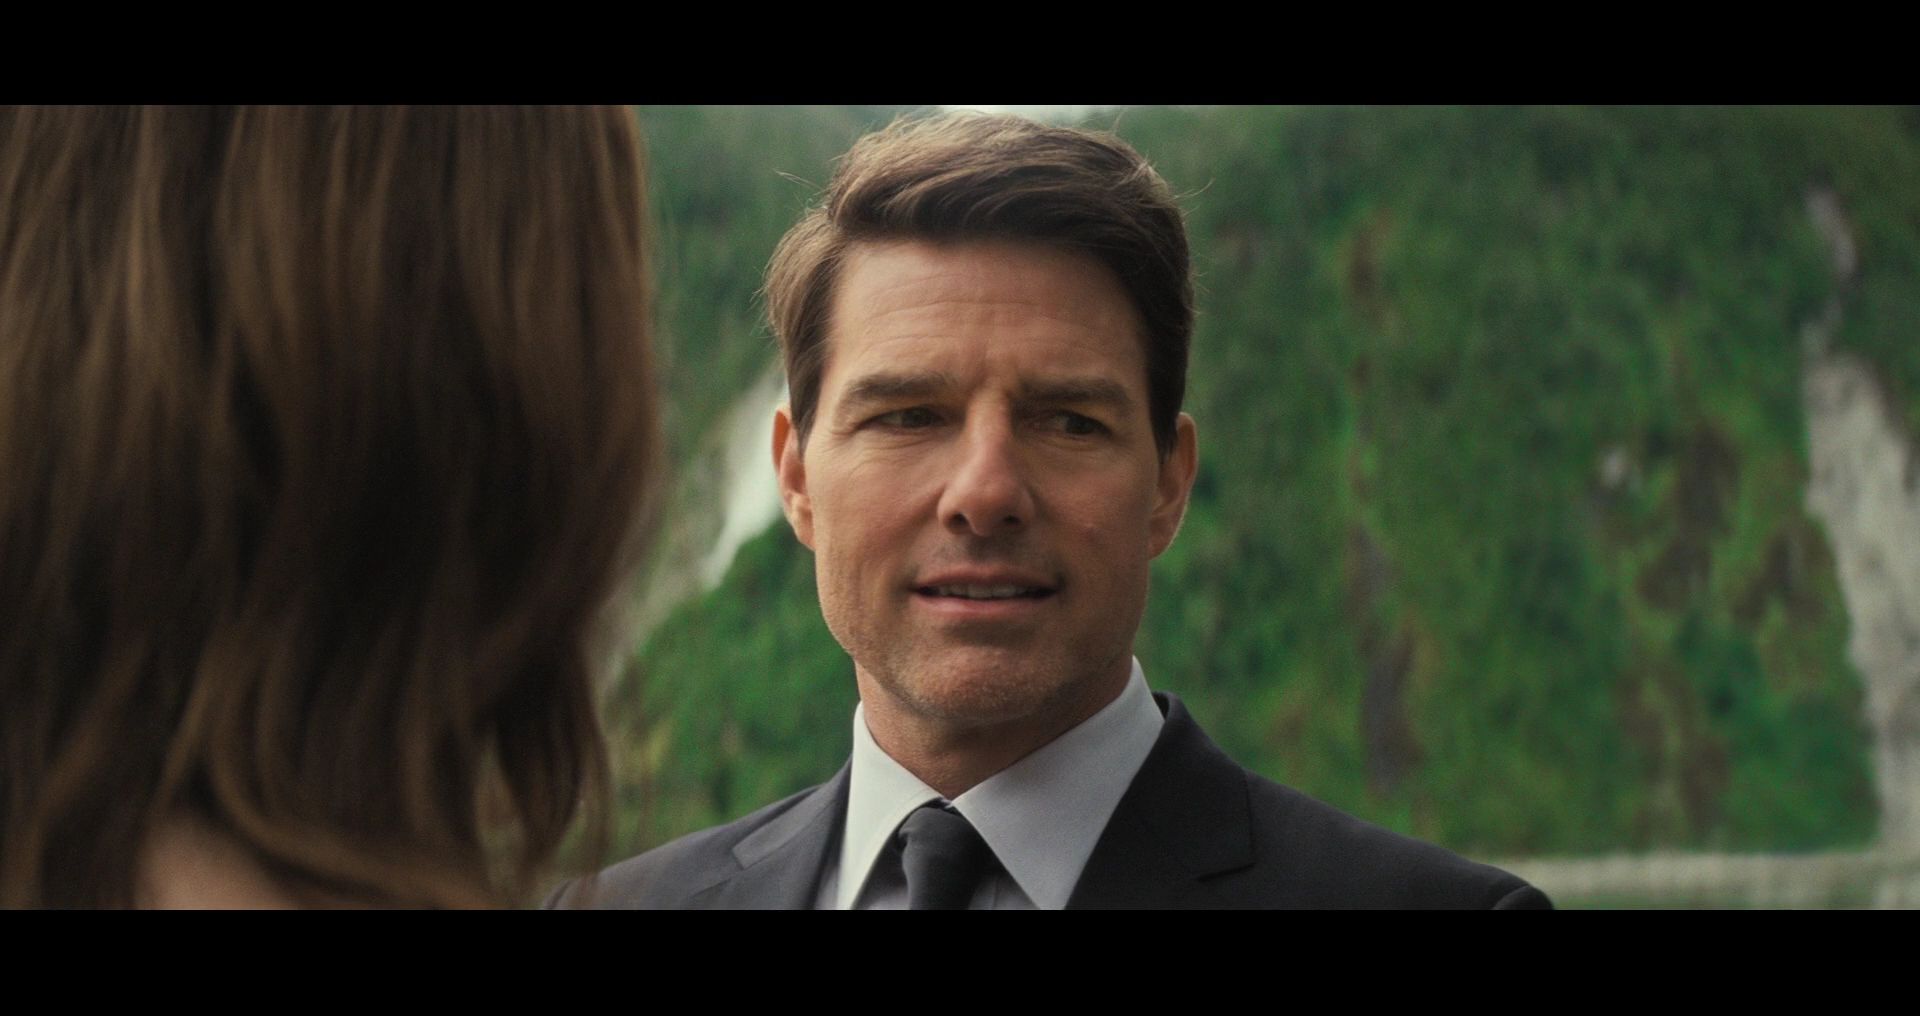 Mission-Impossible-Fallout-0025.jpg